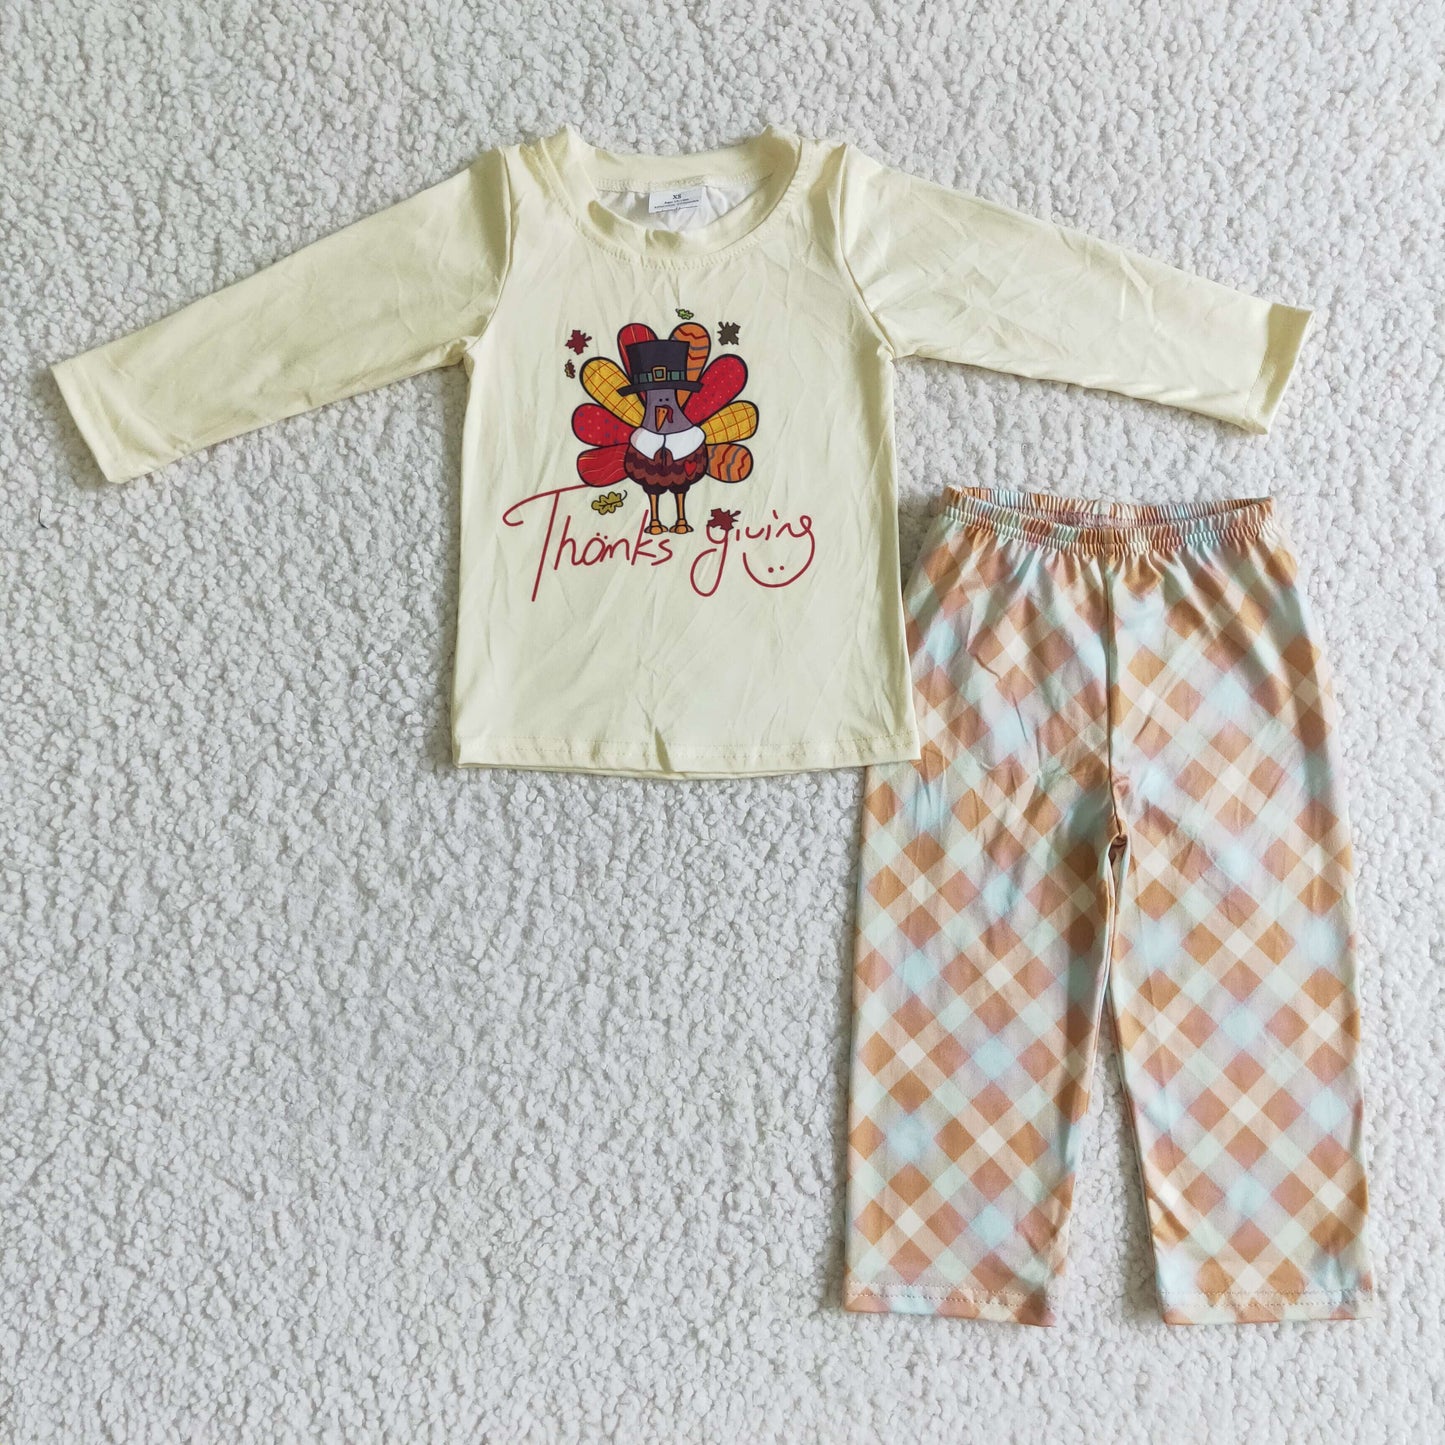 BLP0068 boy long sleeve turkey print shirt match plaid pants outfit for thanks giving day